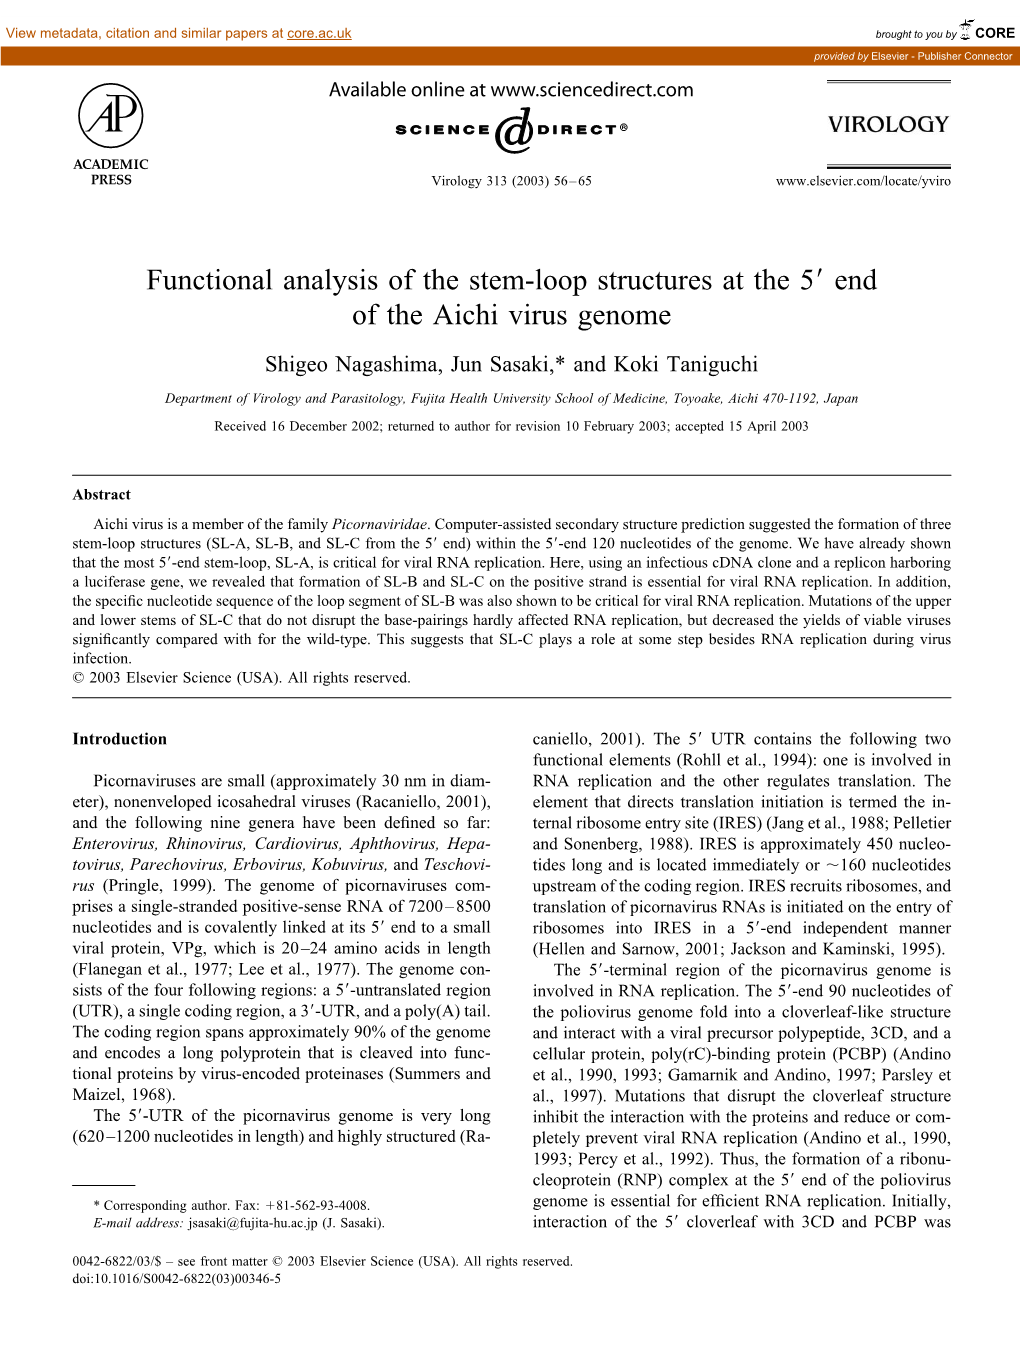 Functional Analysis of the Stem-Loop Structures at the 5 End of the Aichi